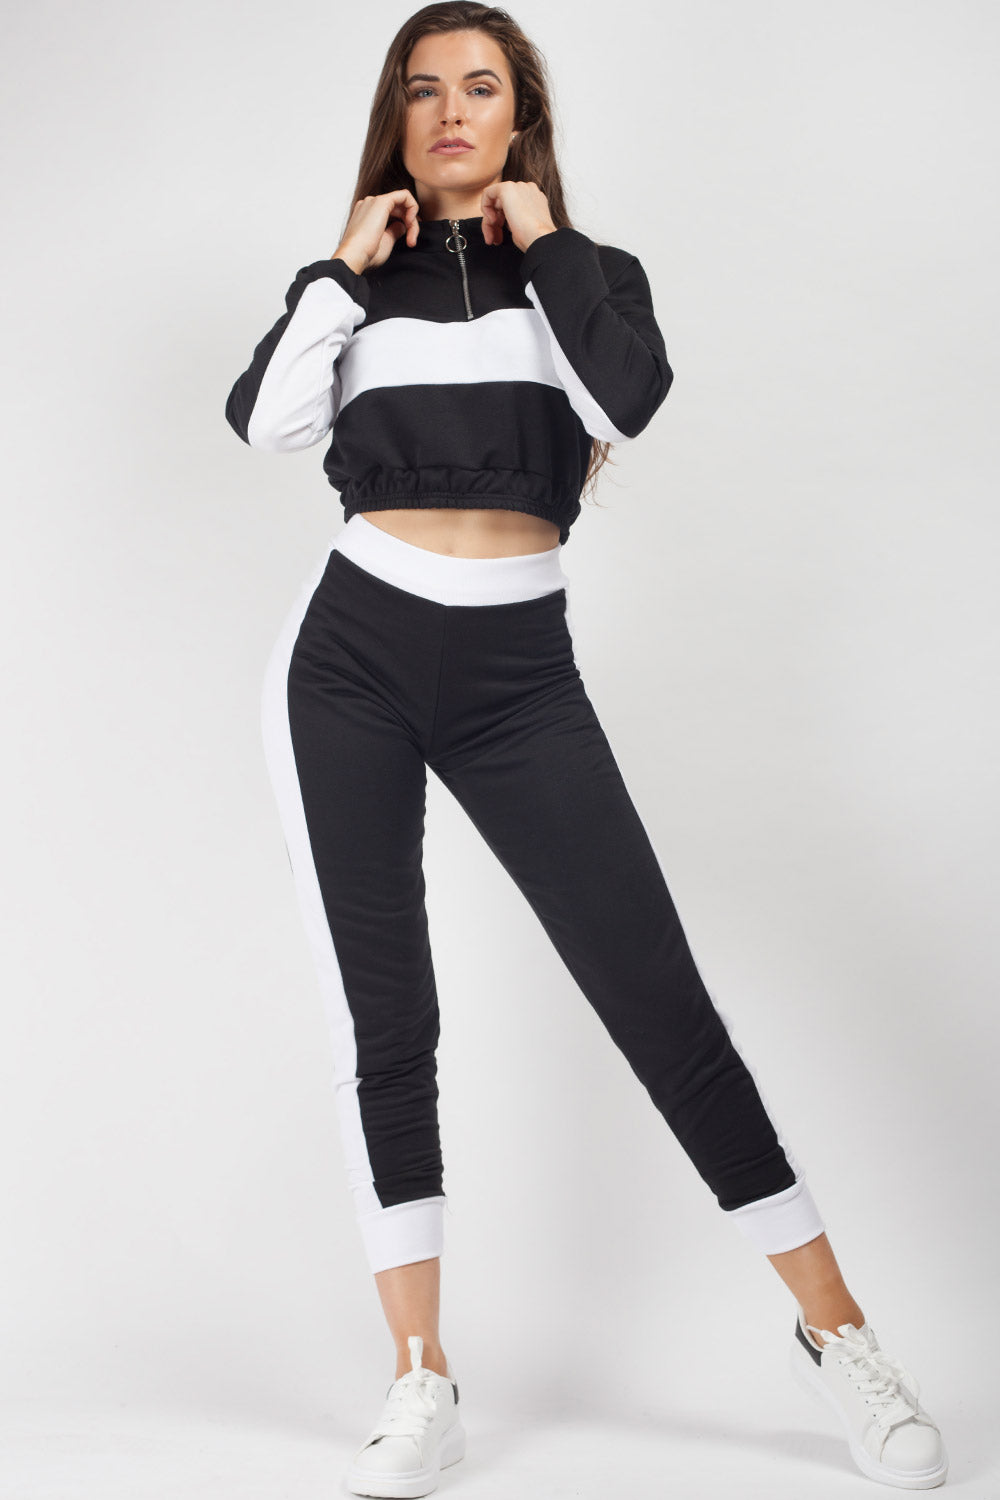 white and black striped tracksuit womens styledup fahion